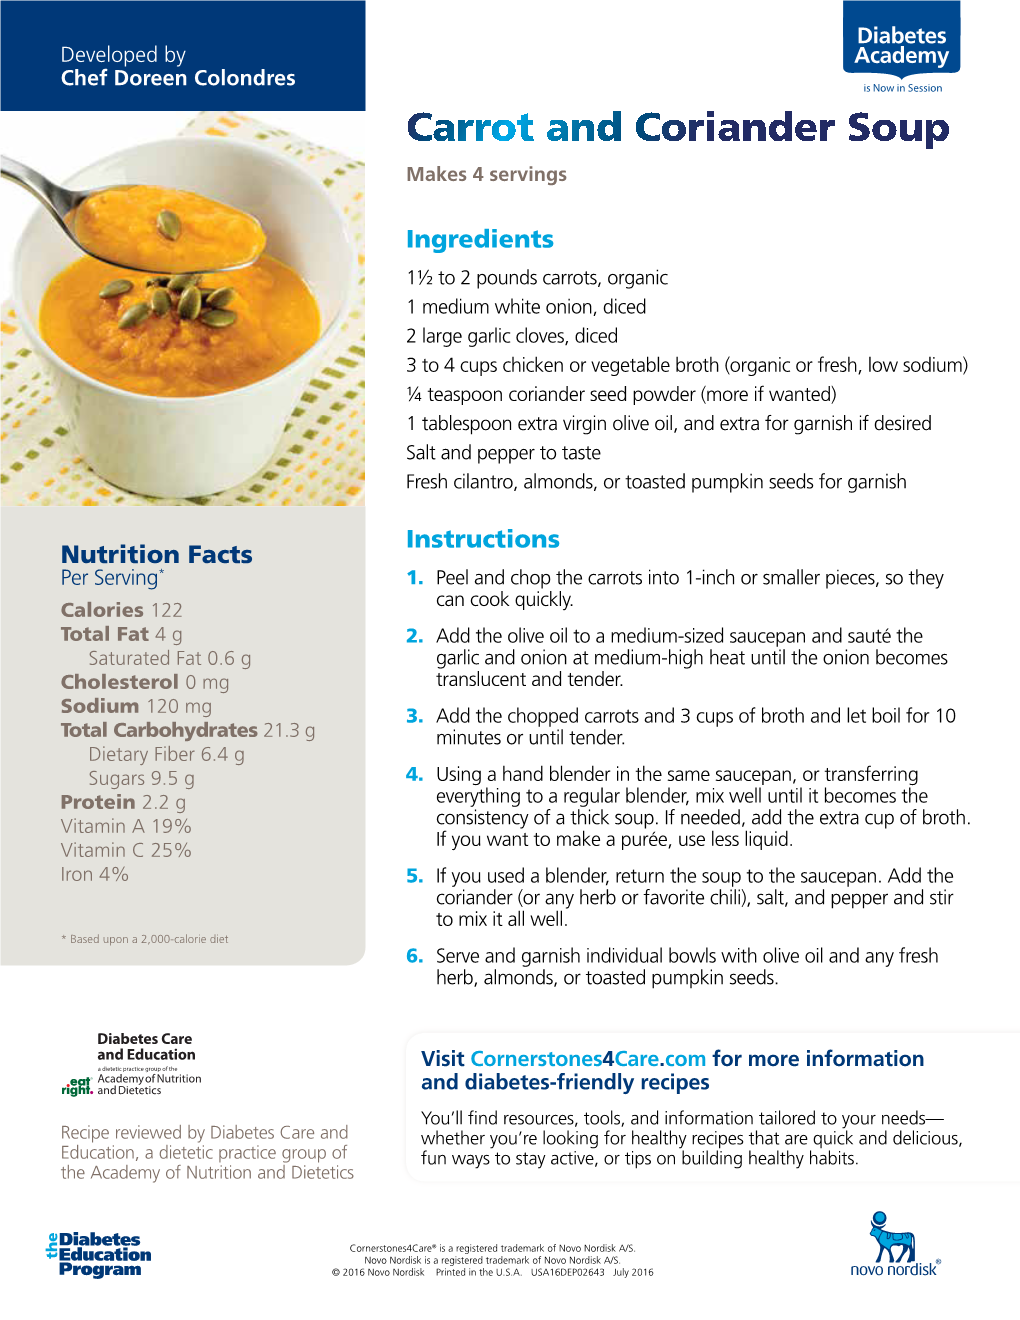 Carrot and Coriander Soup Makes 4 Servings